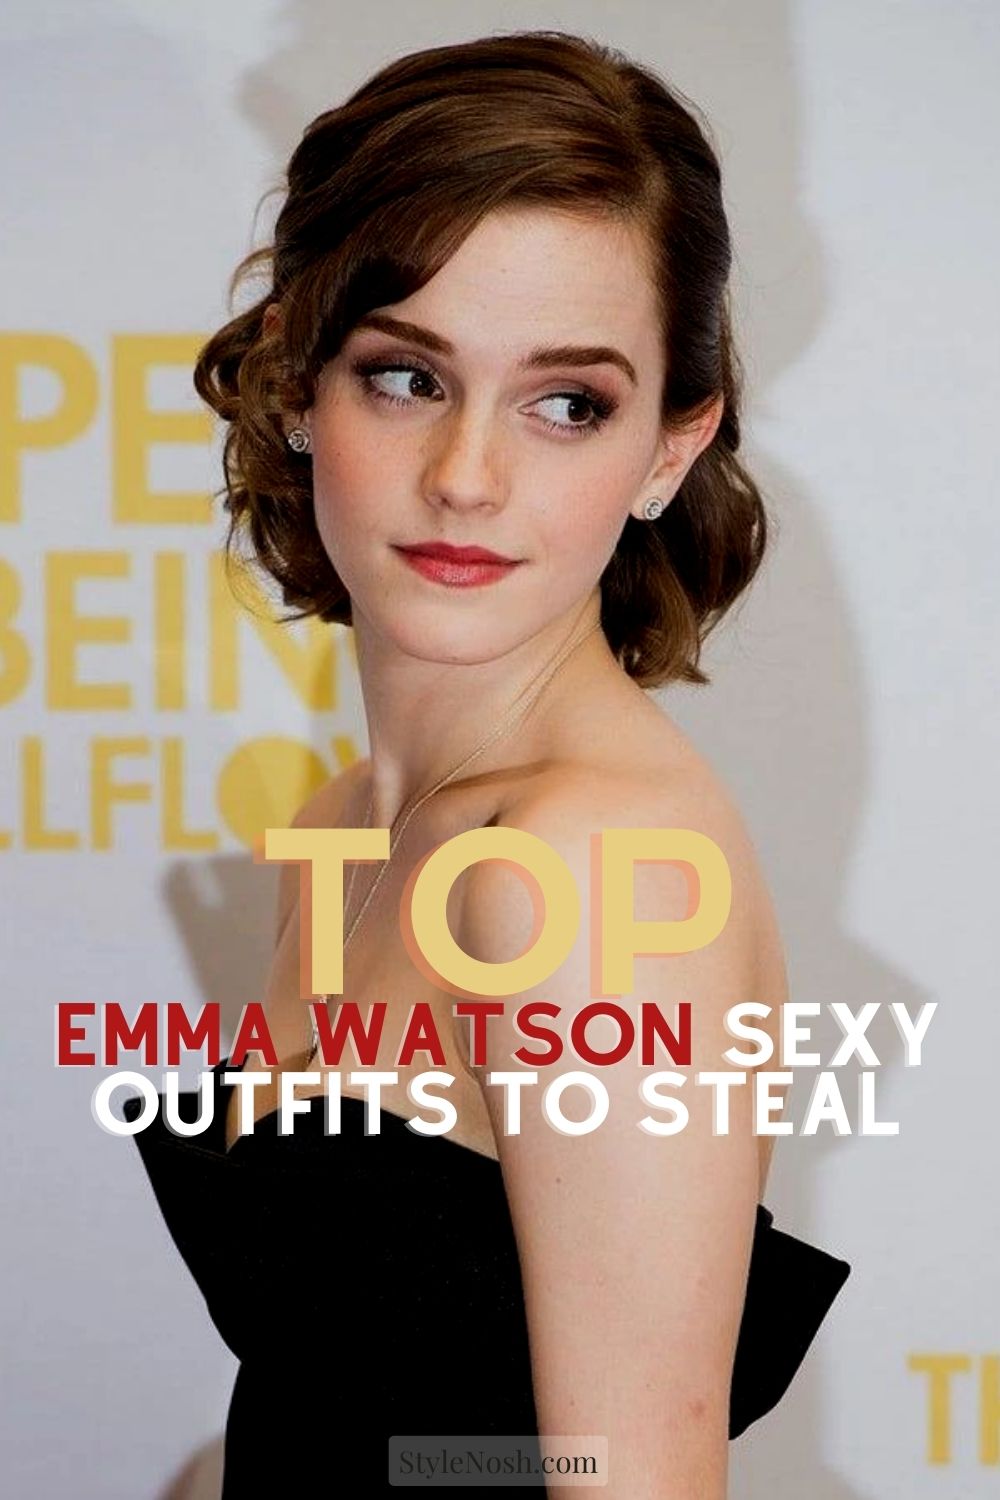 Top Emma Watson Sexy Outfits To Steal.